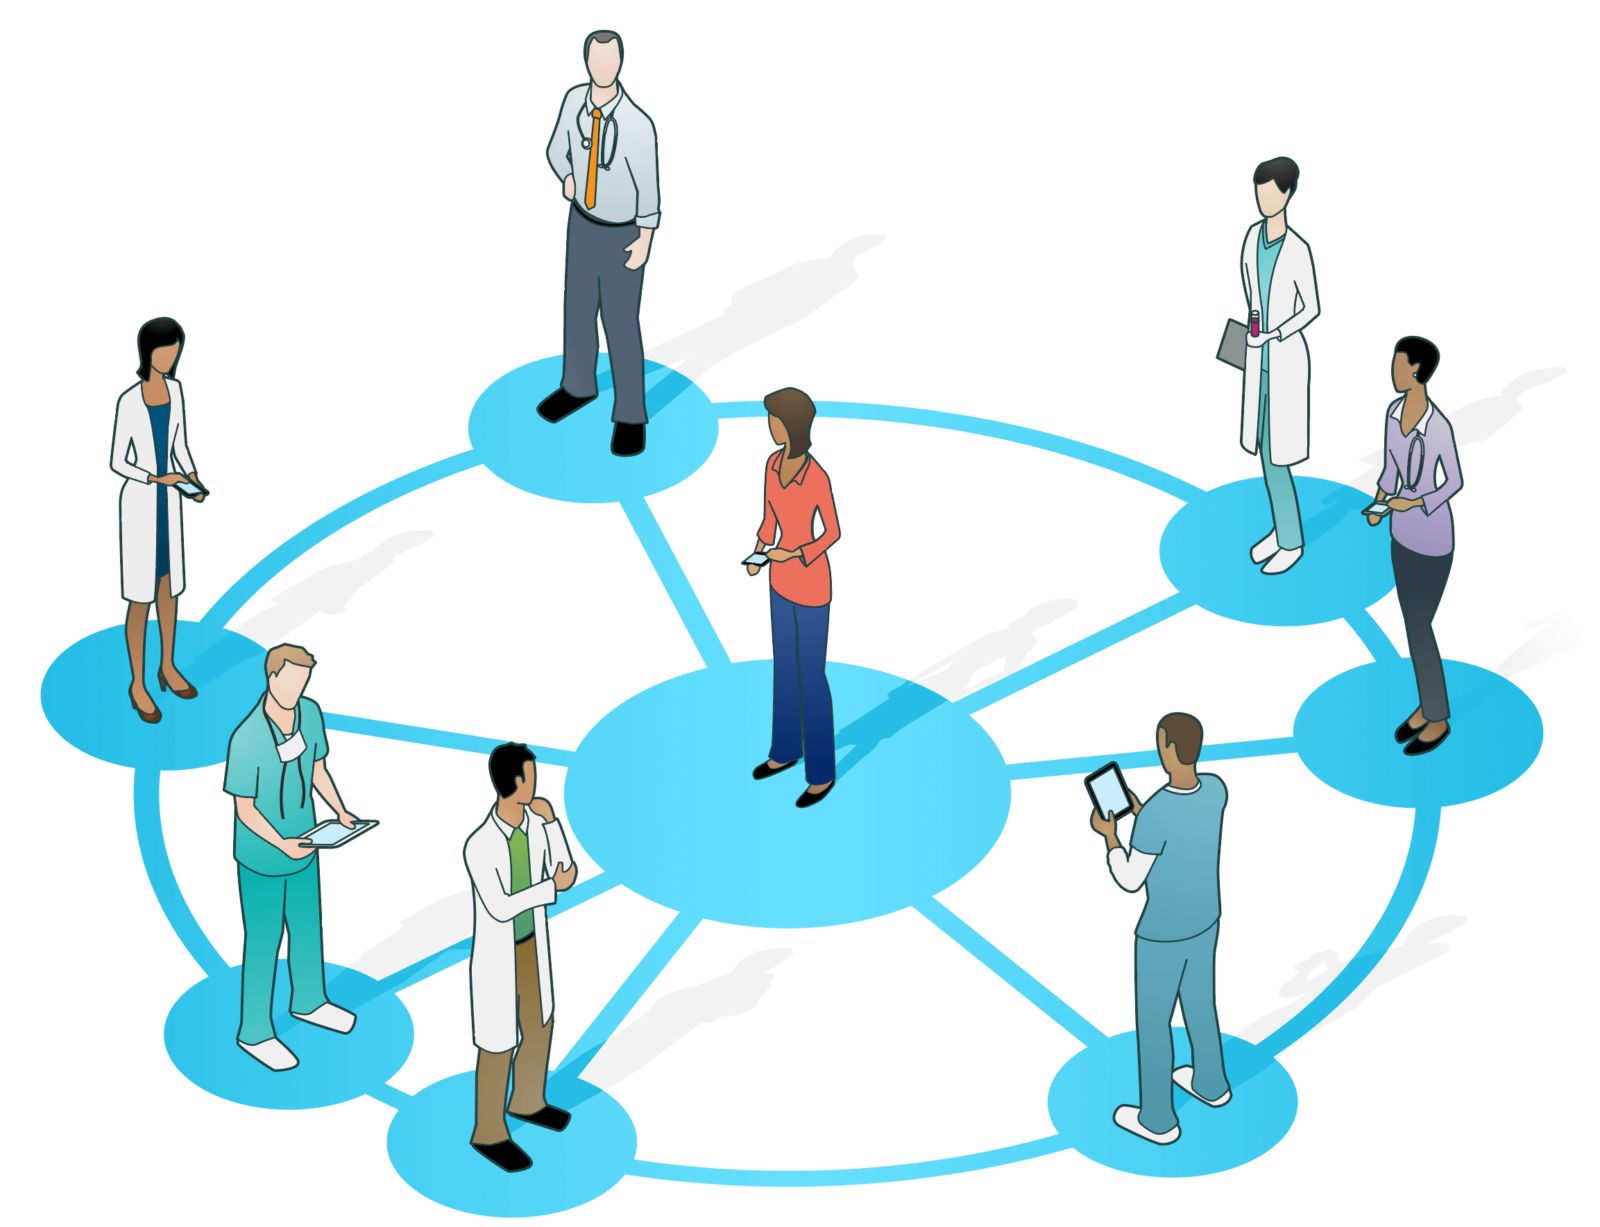 A circle of various healthcare providers surrounding a person.